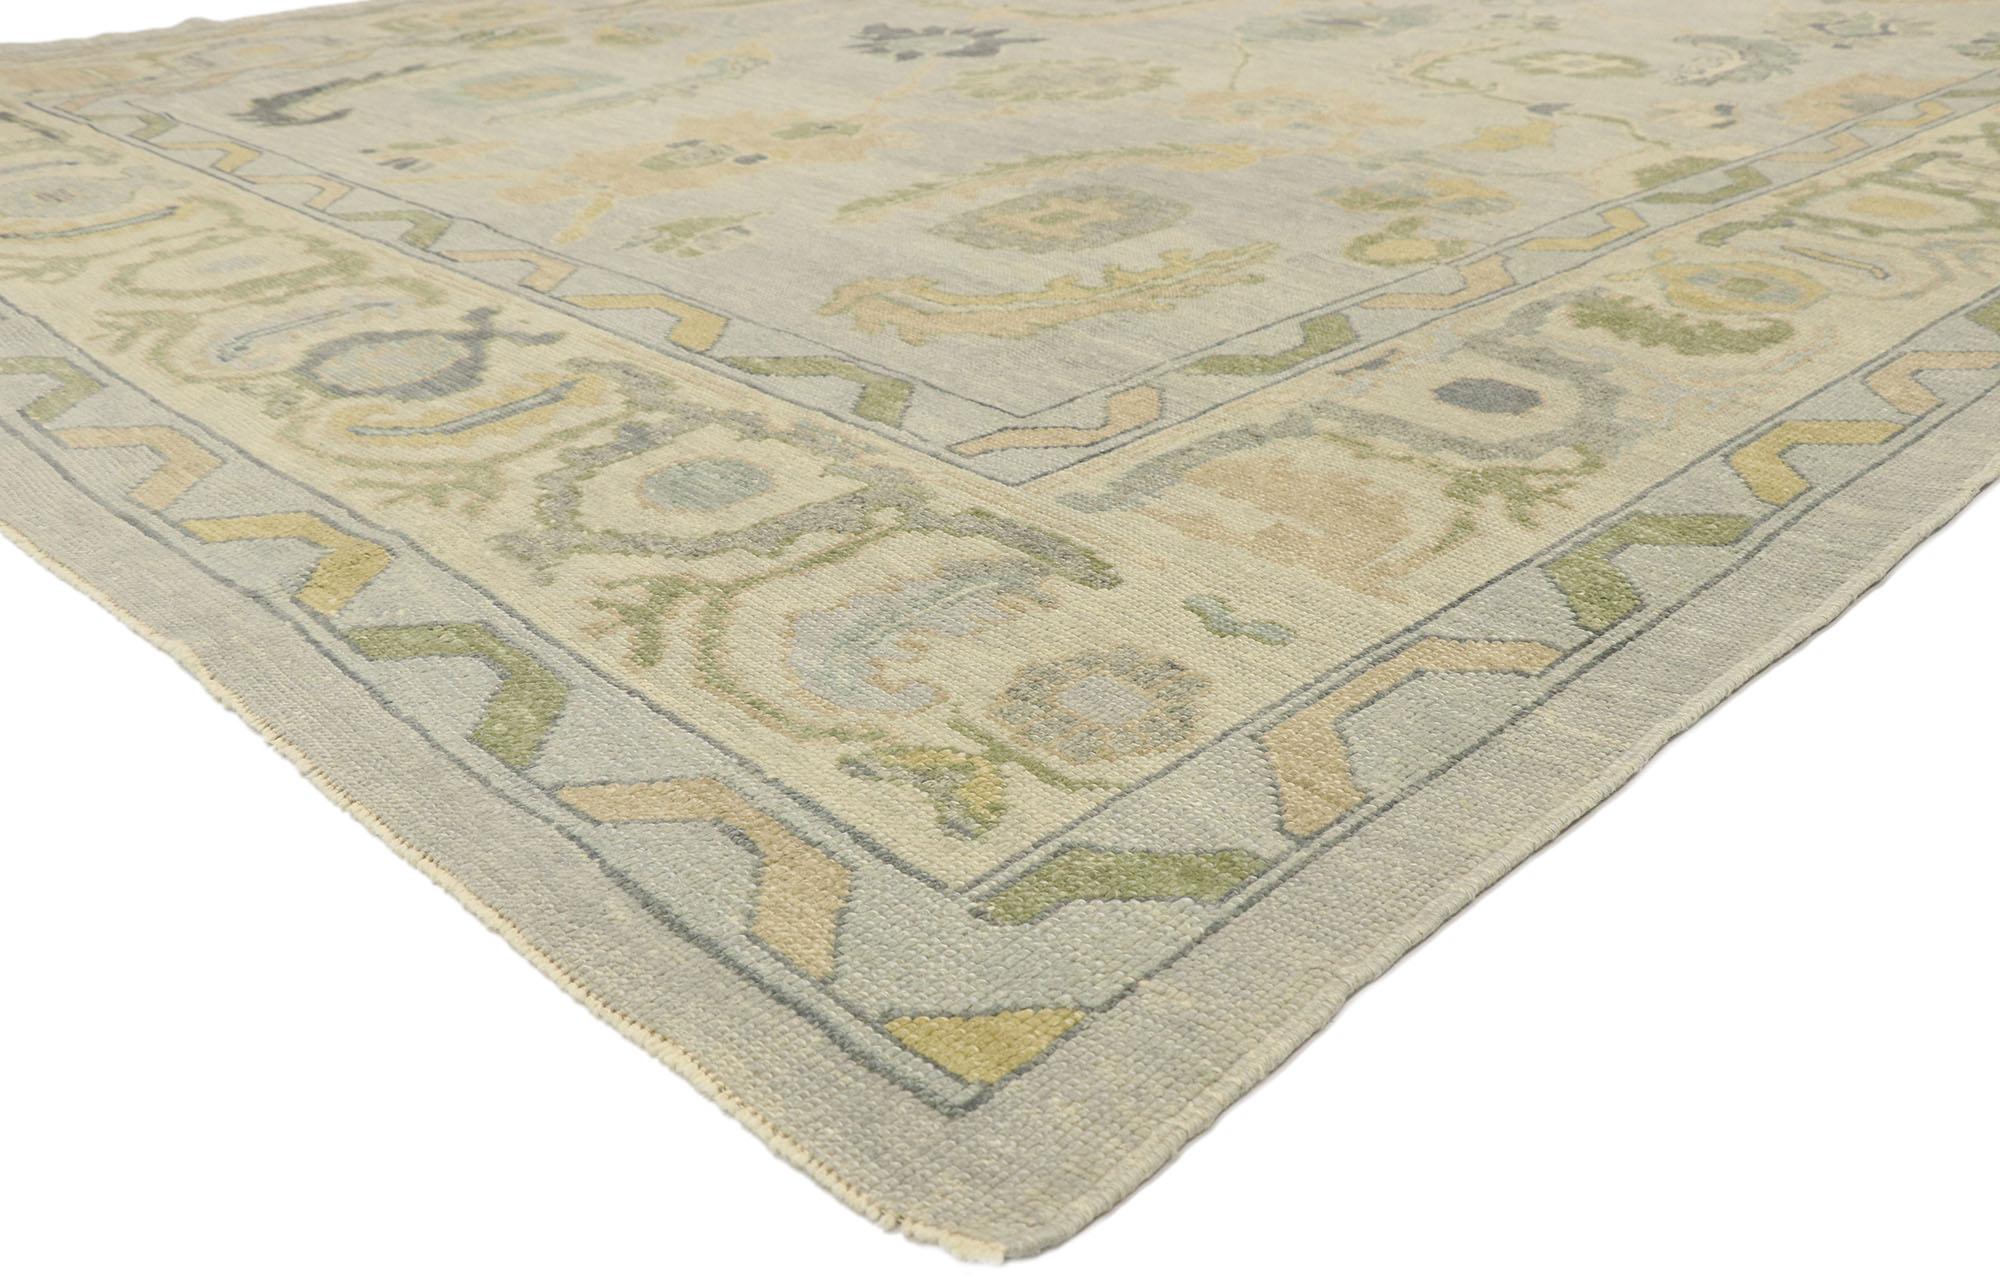 52869 New Contemporary Turkish Oushak rug with Modern Transitional style. Blending elements from the modern world with light and airy colors, this hand knotted wool contemporary Turkish Oushak rug will boost the coziness factor in nearly any space.